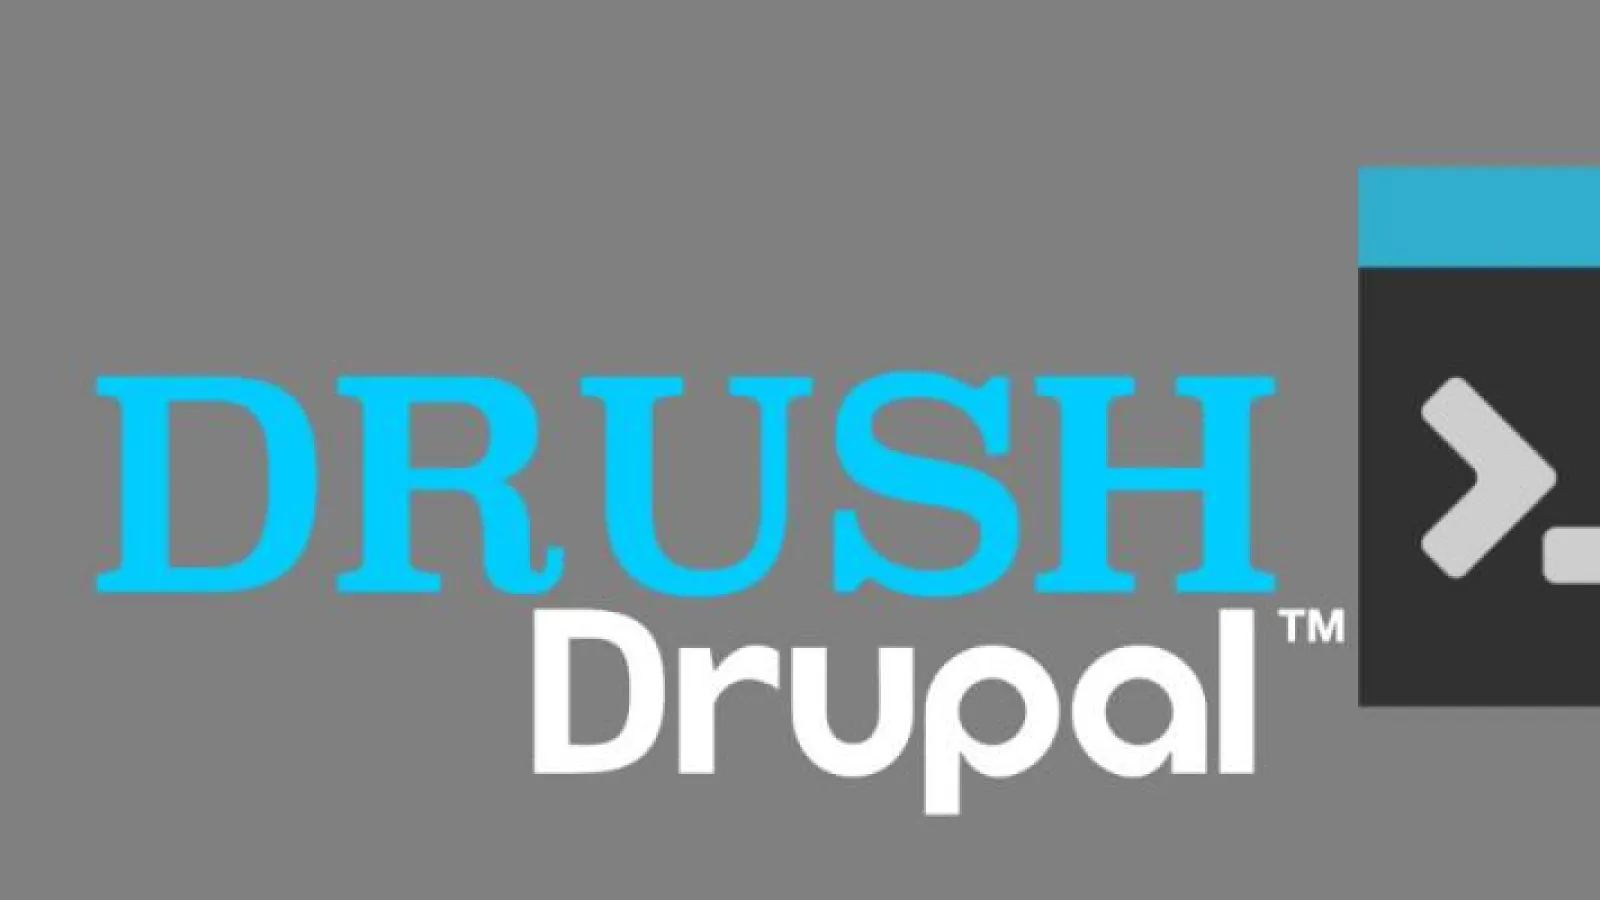 Installing Drupal with Drush